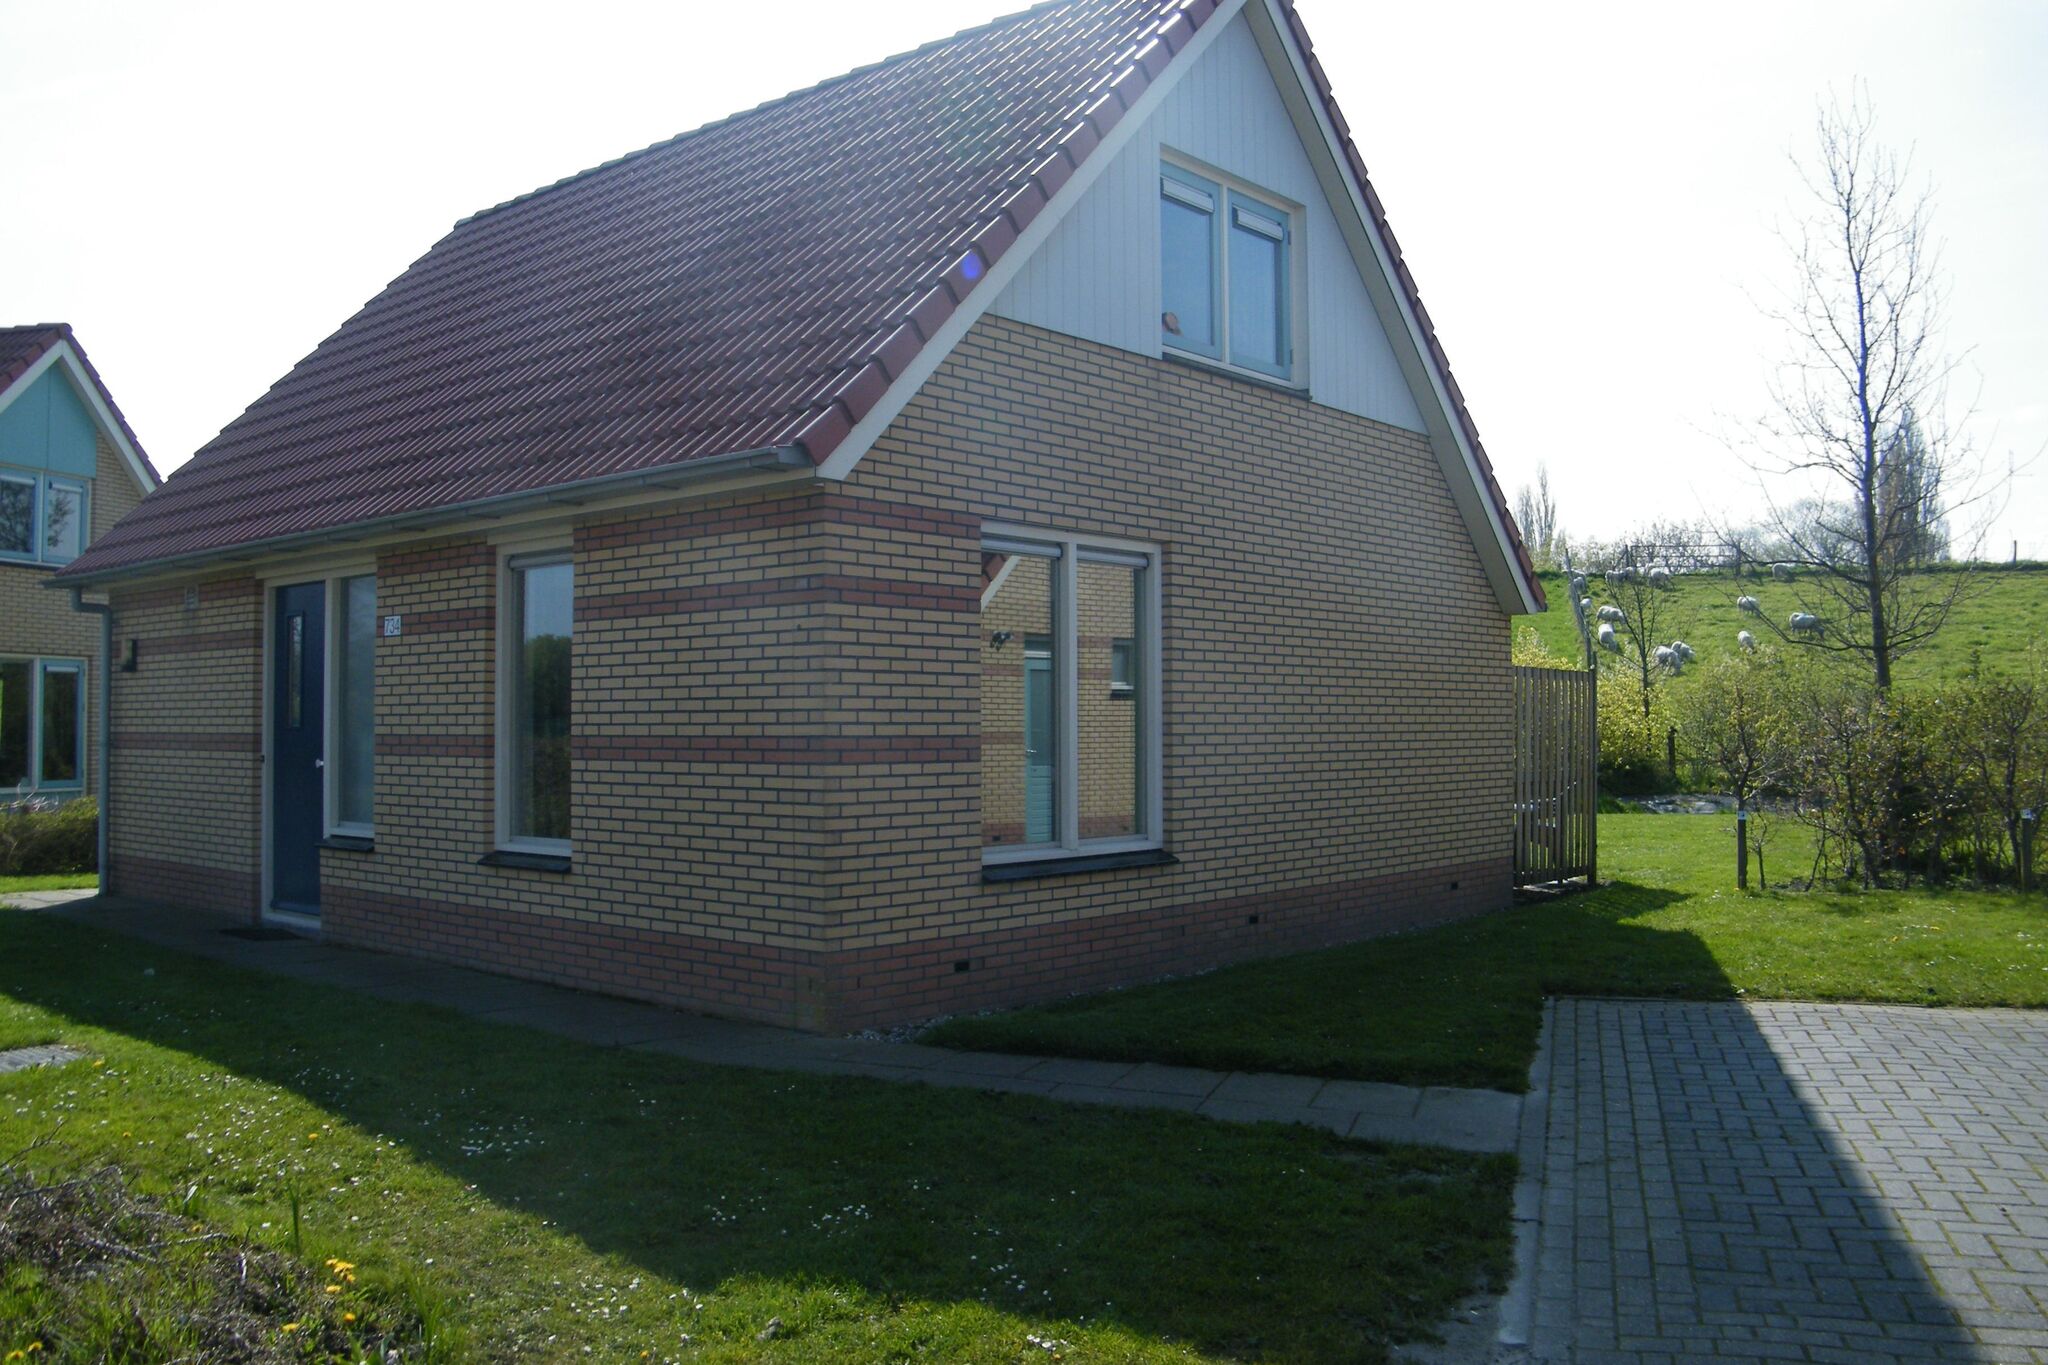 House with dishwasher, 19 km. from Hoorn